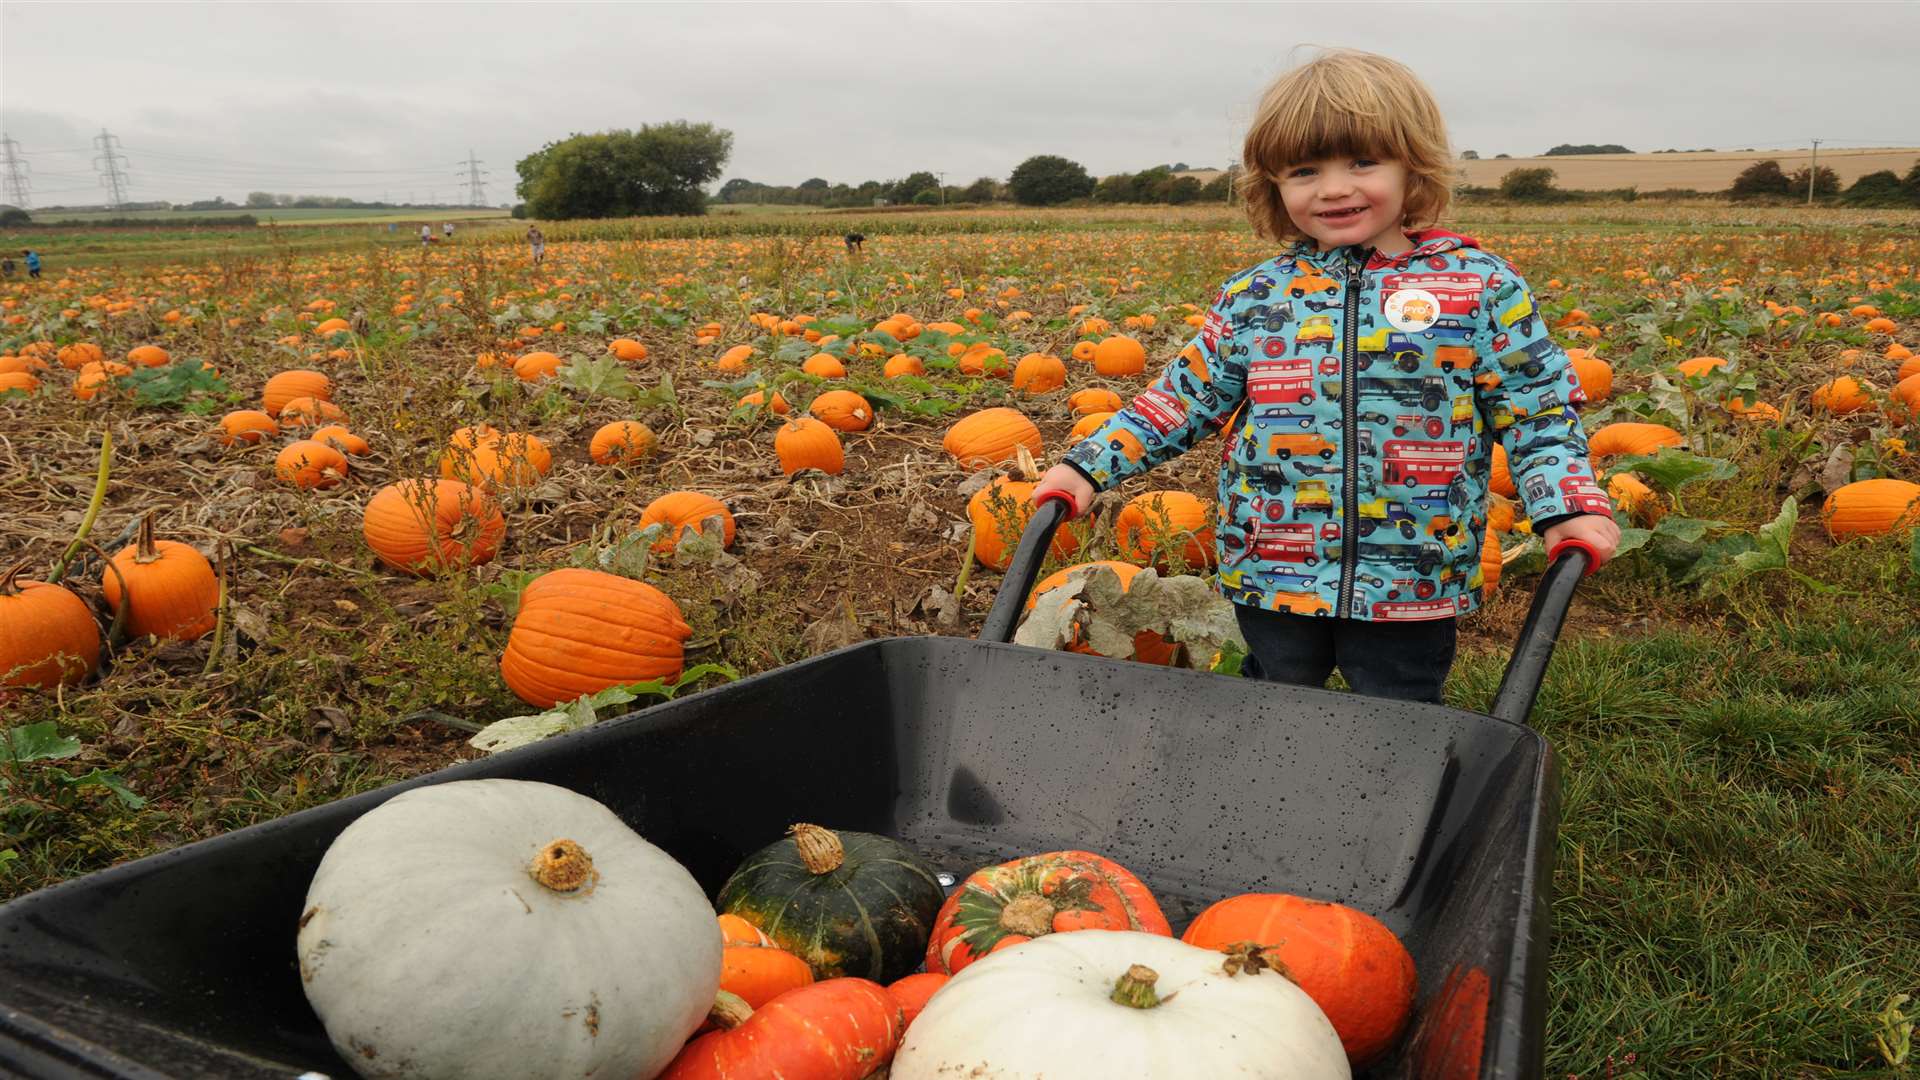 Seb Carey-Wilson, aged three, enjoying the farm. But others have been damaging the pumpkins.